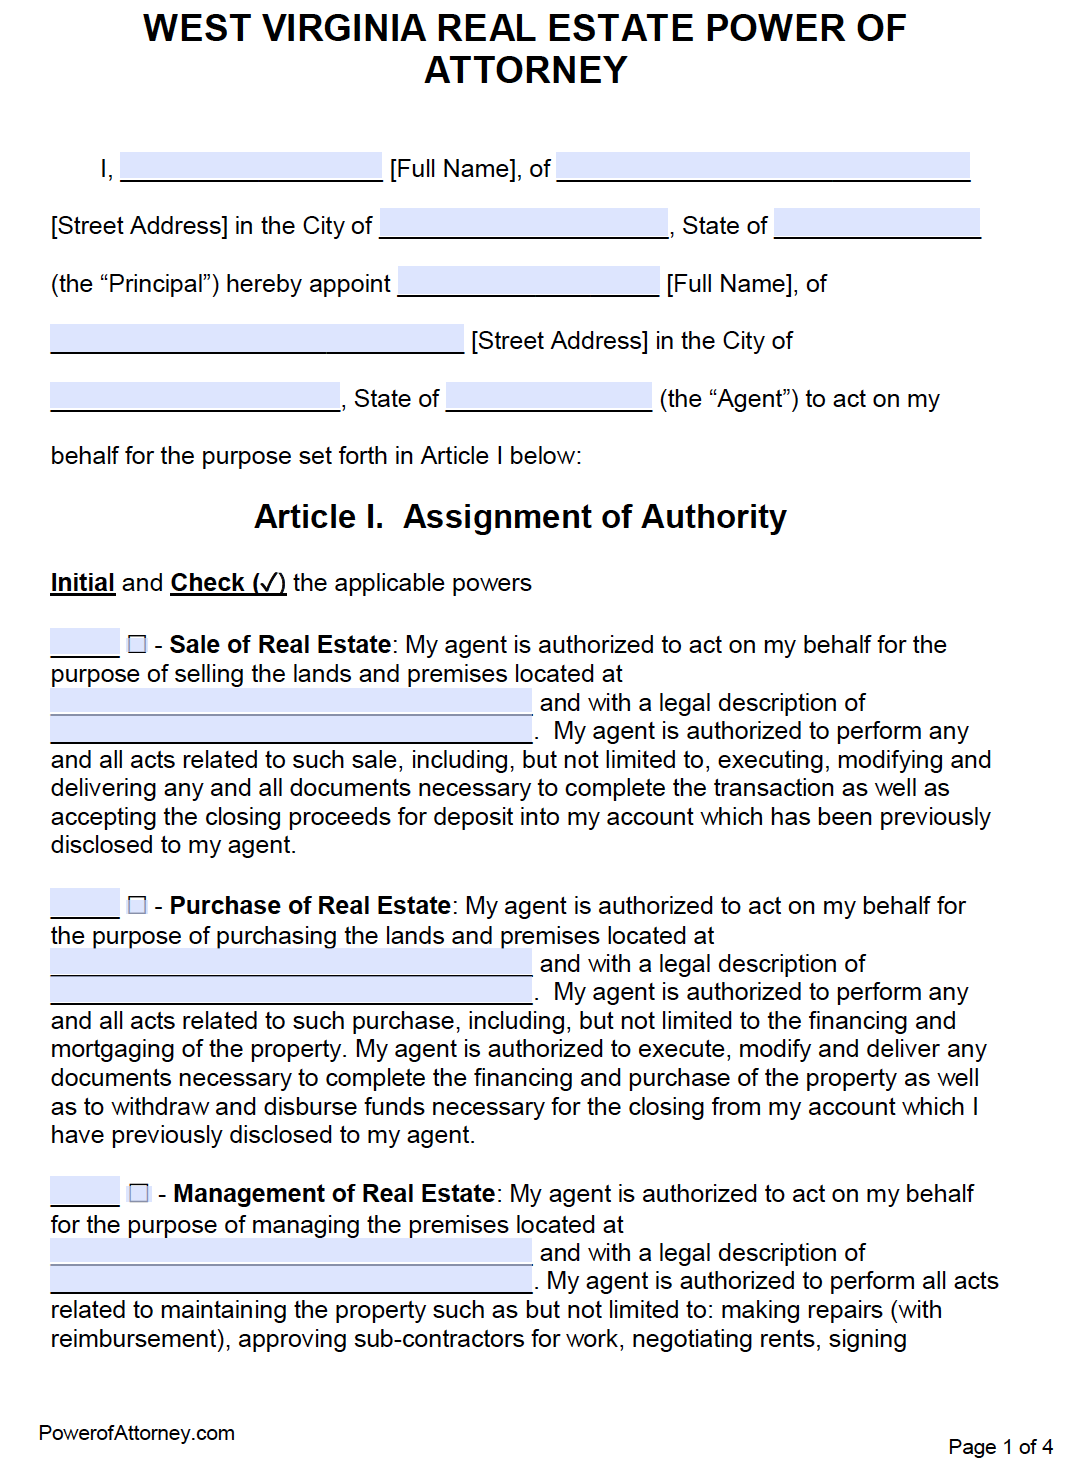 Free Real Estate Power of Attorney West Virginia Form PDF Word